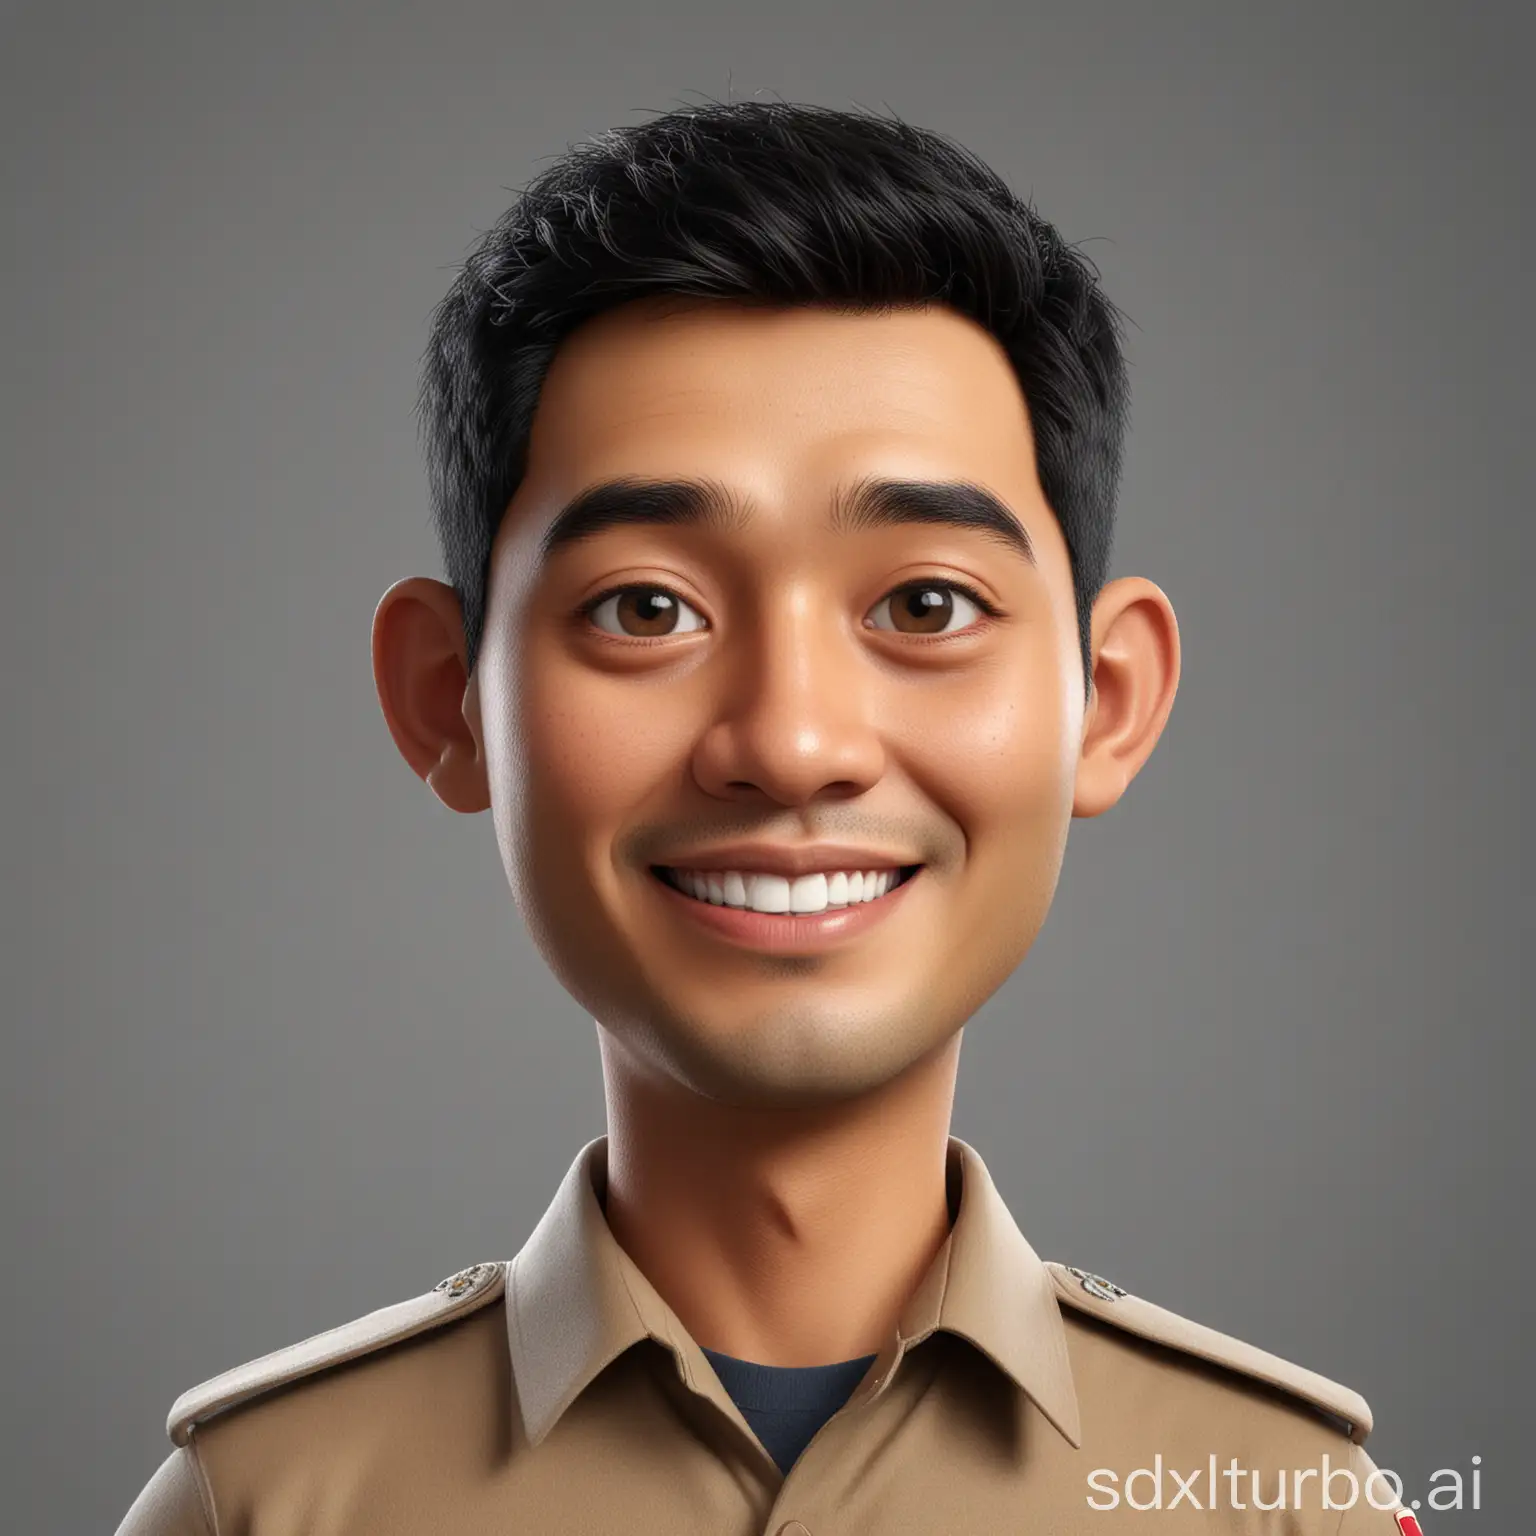 Create a full 3D cartoon style body with a big head. 40 year old Indonesian man, clean face. Ideal height, square face shape. handsome, his eyes are slightly round, his skin is pure white, his smile is thin and sweet. black hair, parted to the side, wearing a light brown government uniform with its emblem. Body position is clearly visible. The background is a solid white neutral color. Use soft photography lighting, hair lighting, top lighting, side lighting. Highest quality photos, Uhd,16k